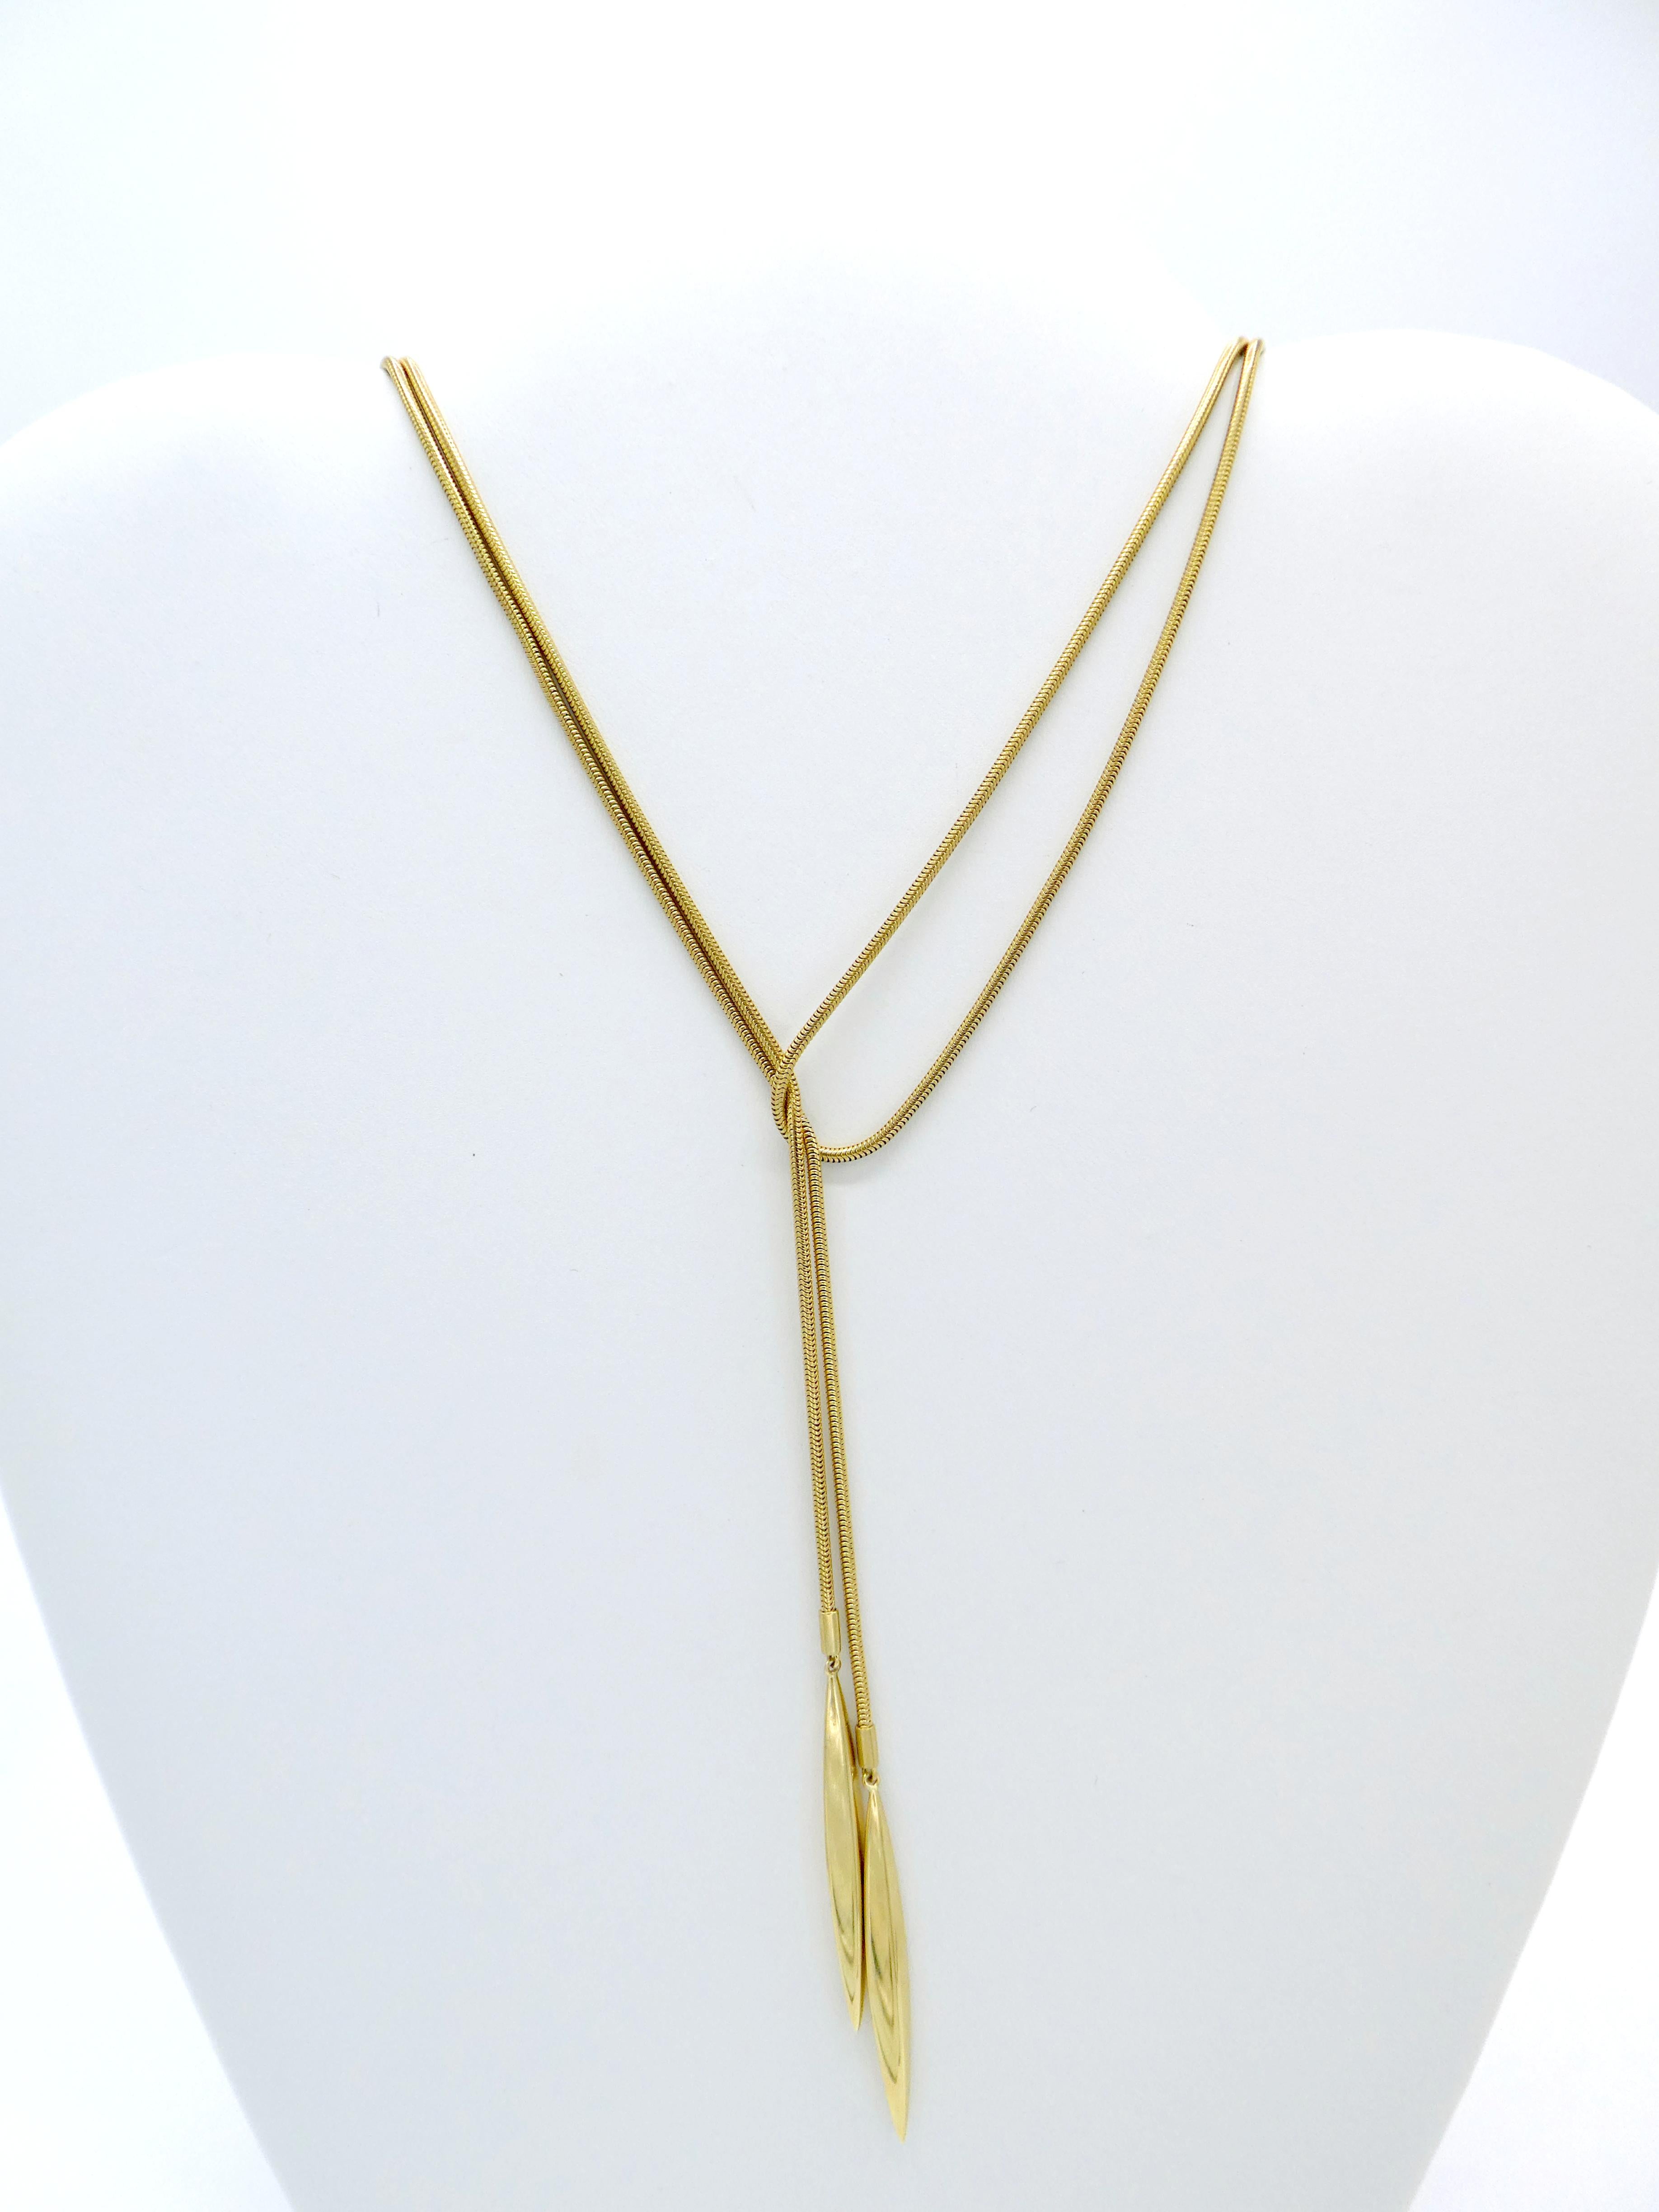 Tiffany & Co. 18 Karat Gold Lariat Double Feather Snake Chain Wrap Necklace

Metal: 18k yellow gold
Weight: 32 grams
Length: 51 inches
Width: 1.57 mm
Markings: 